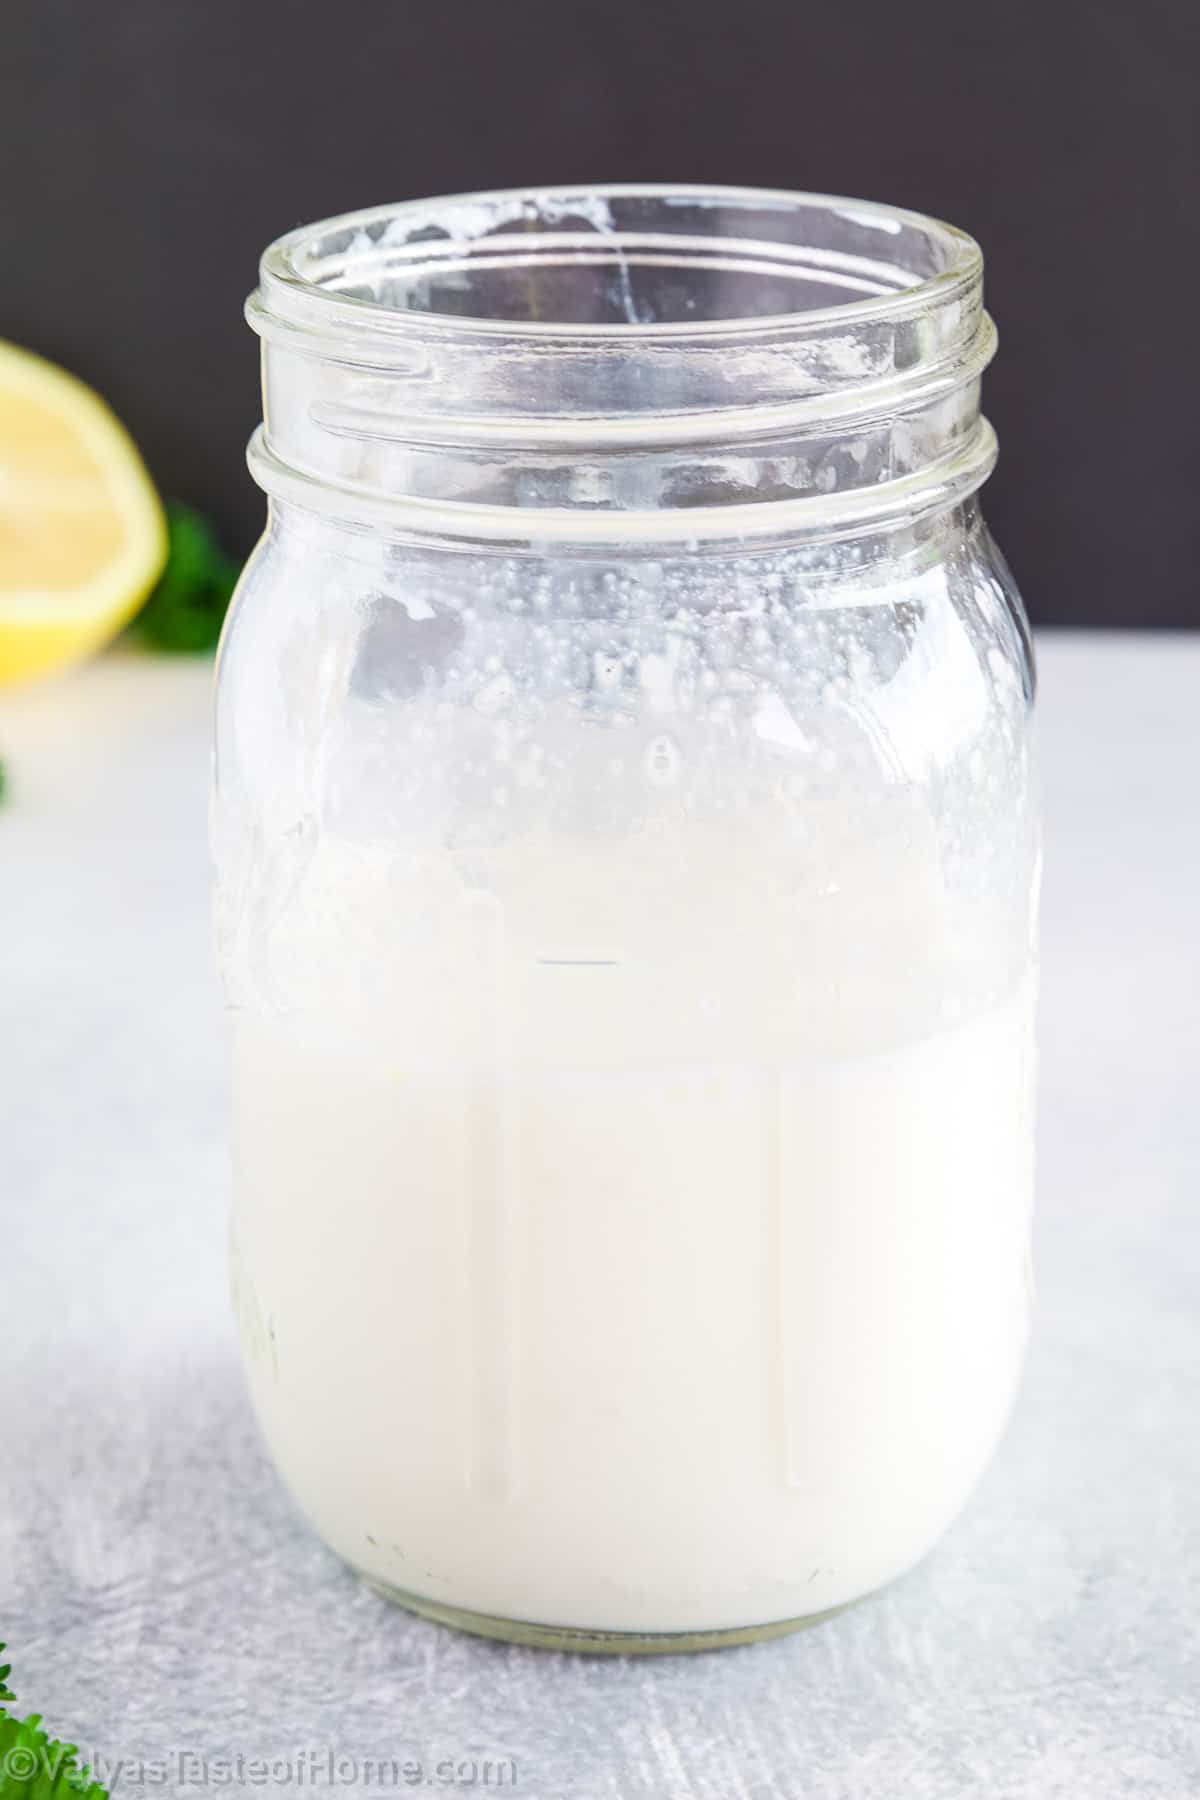 Want to make your own buttermilk? Check out my easy buttermilk recipe that adds a creamy, tangy twist to your dishes! It's super easy!